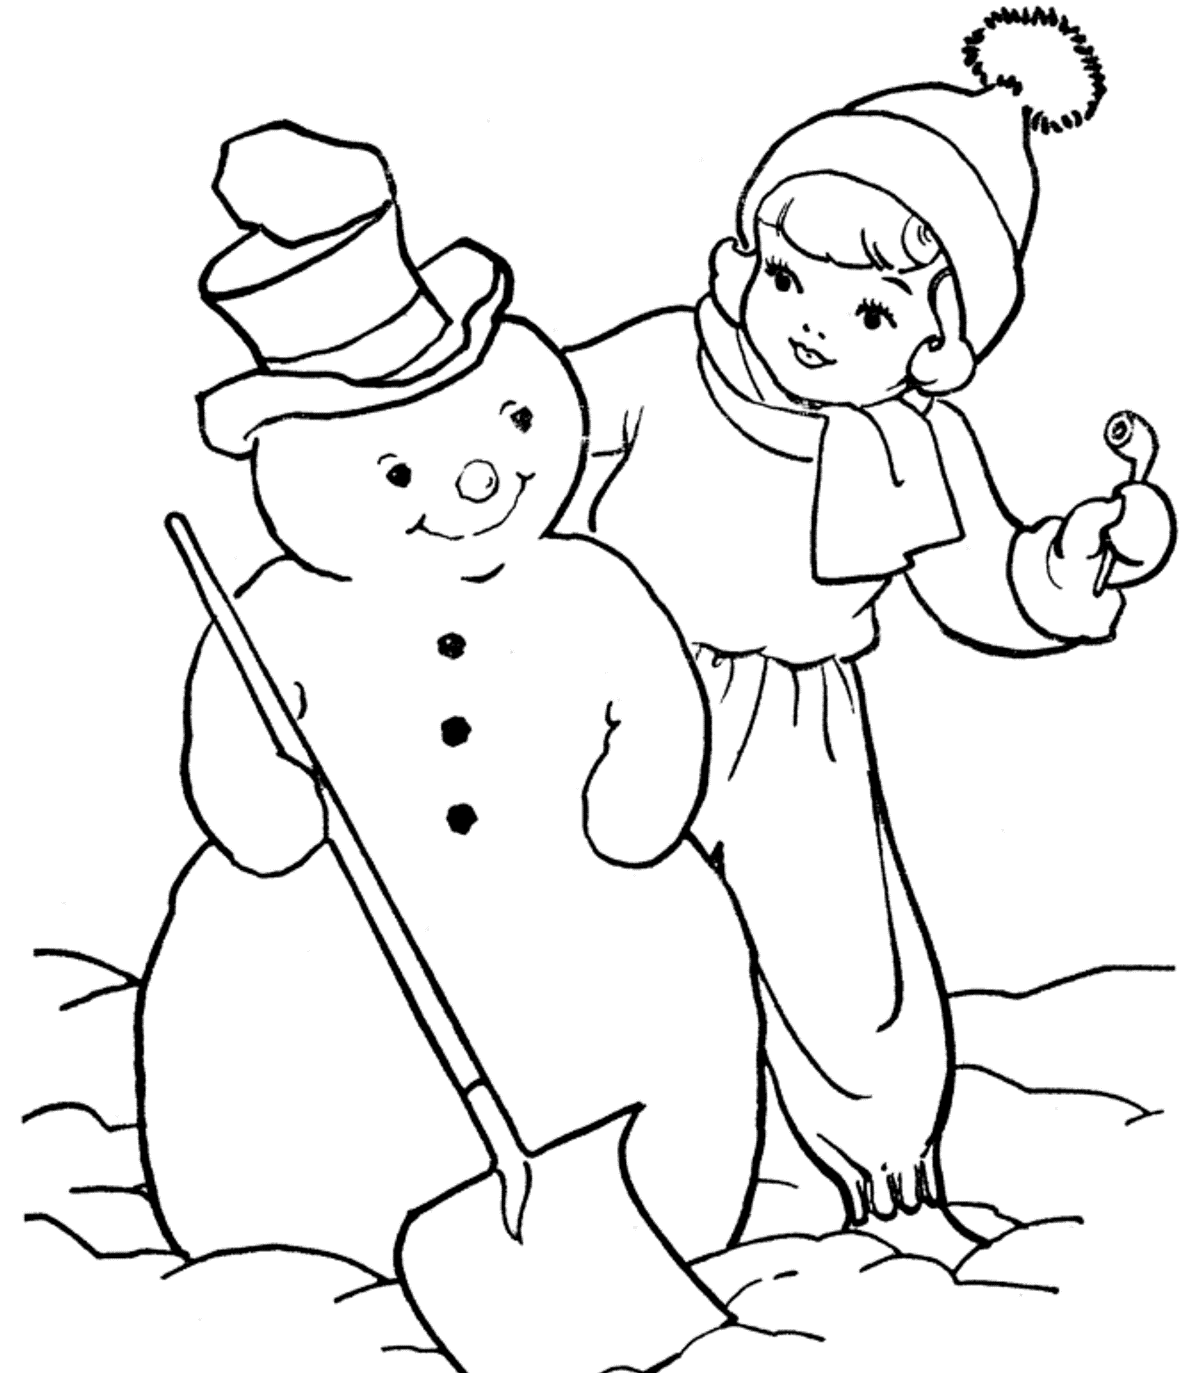 Snowman For Kids To Print